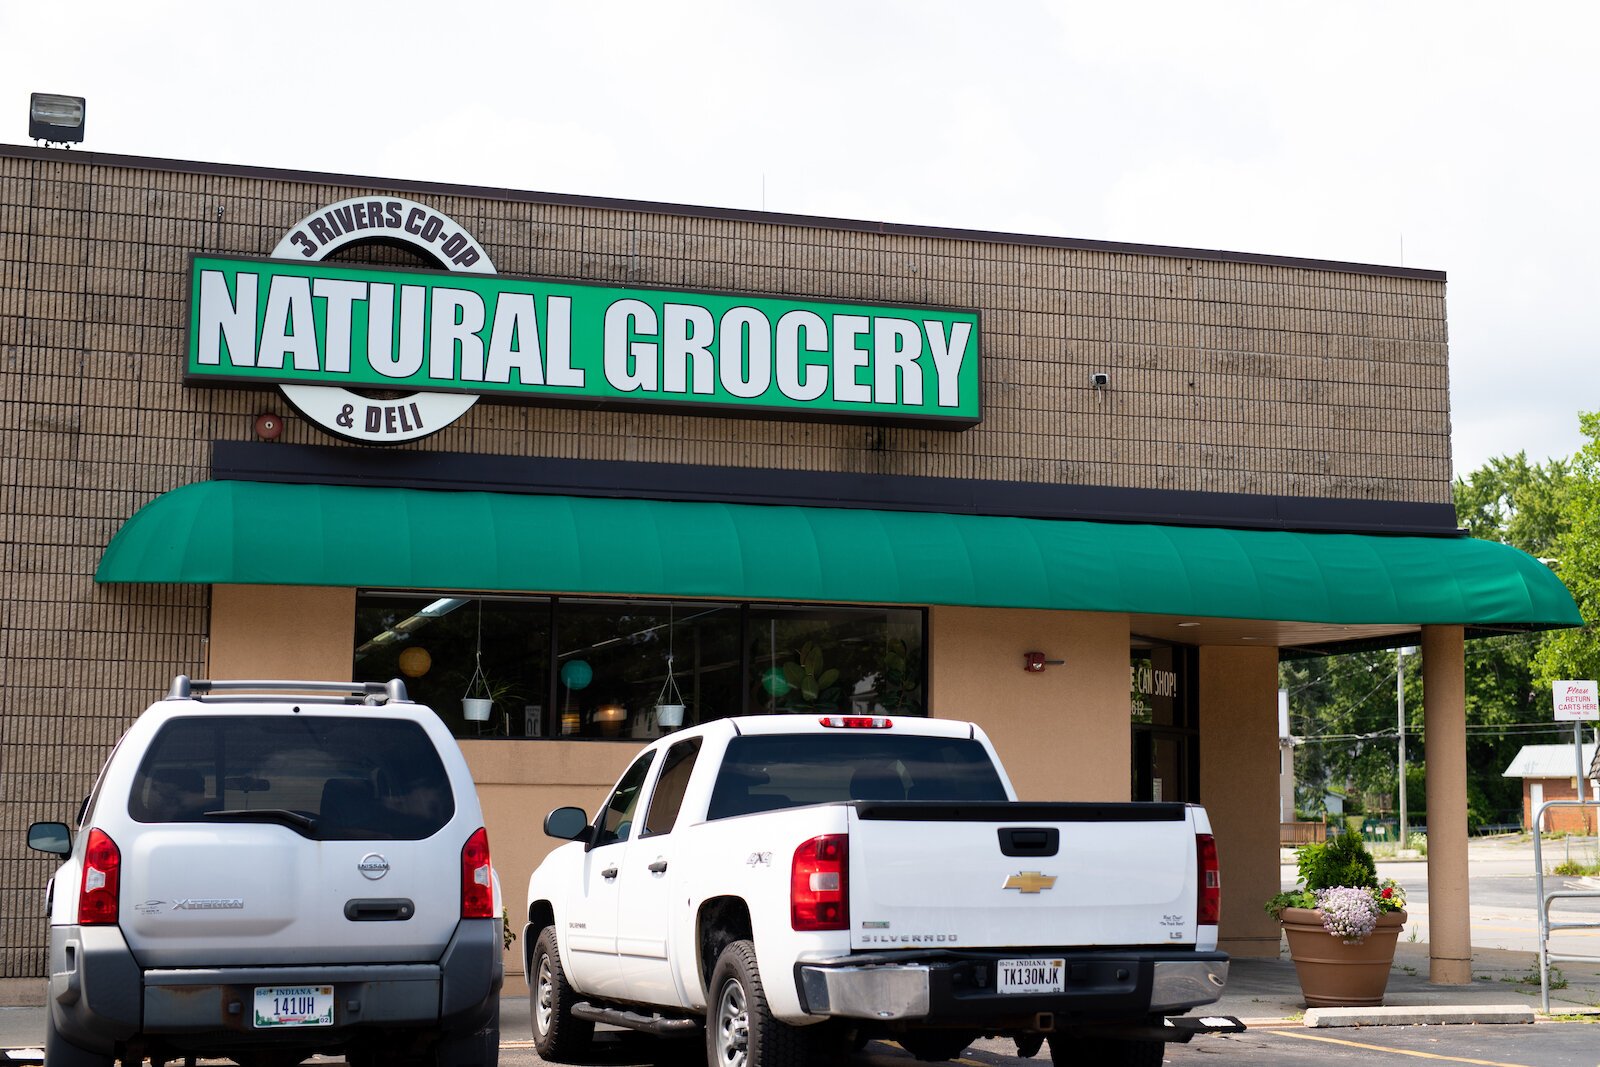 The 3 Rivers Natural Grocery Food Co-op & Deli is located at 1612 Sherman Blvd.